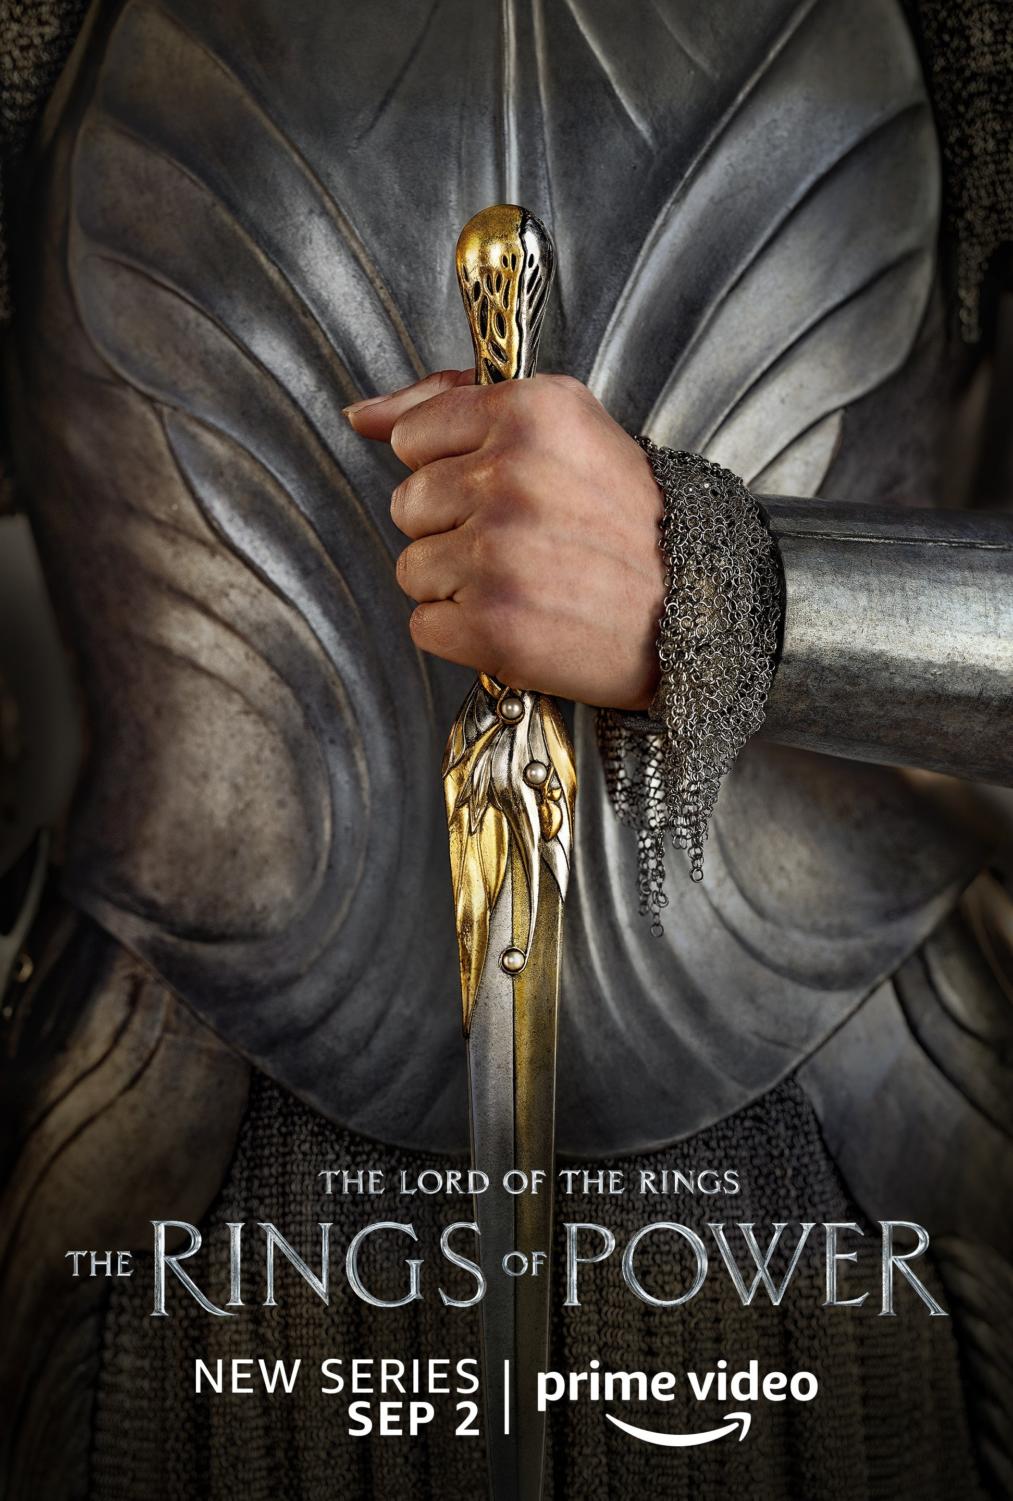 Lord of the Rings: What a Rings of Power Prequel Series Set in the